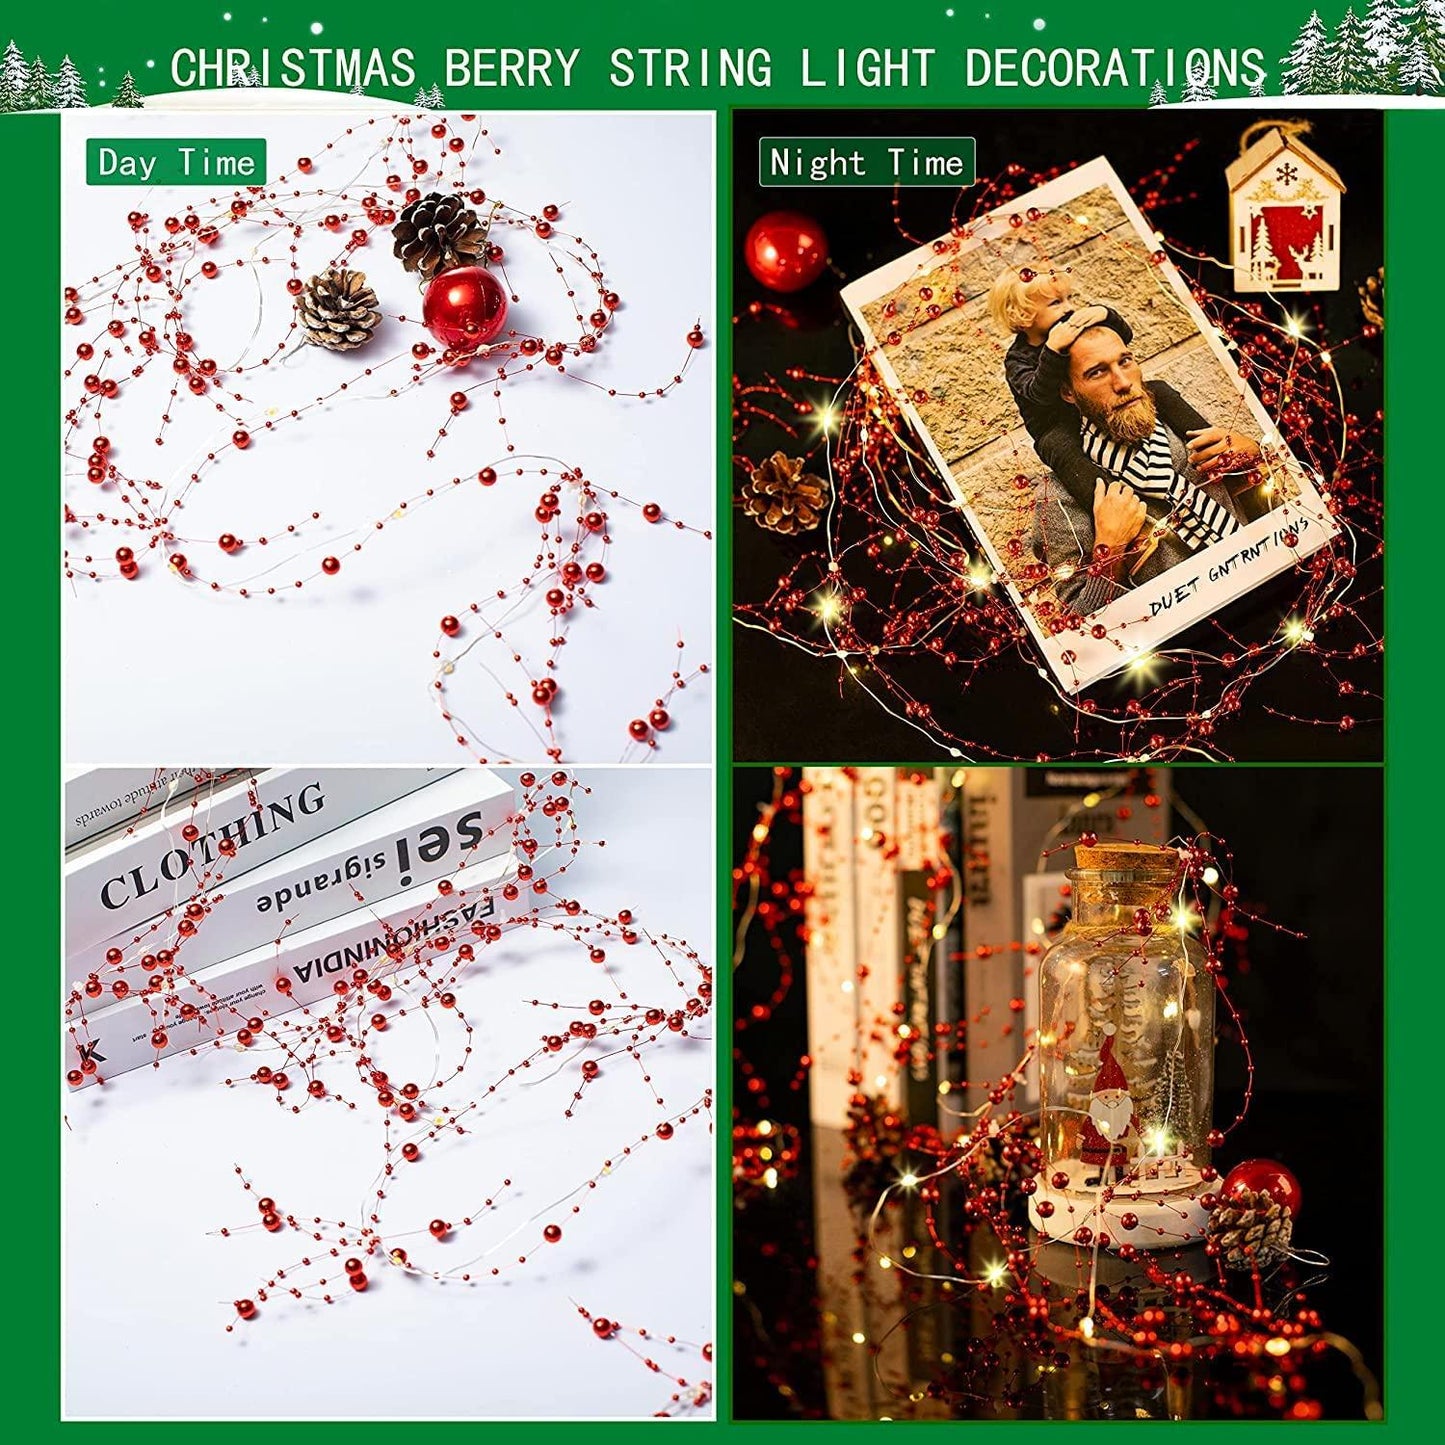 13.12Ft Christmas Decorations Indoor Berry Bead Garland String Lights - Battery Operated Xmas Lights 40LED for Mantel Tree Ornaments Party Decor - If you say i do